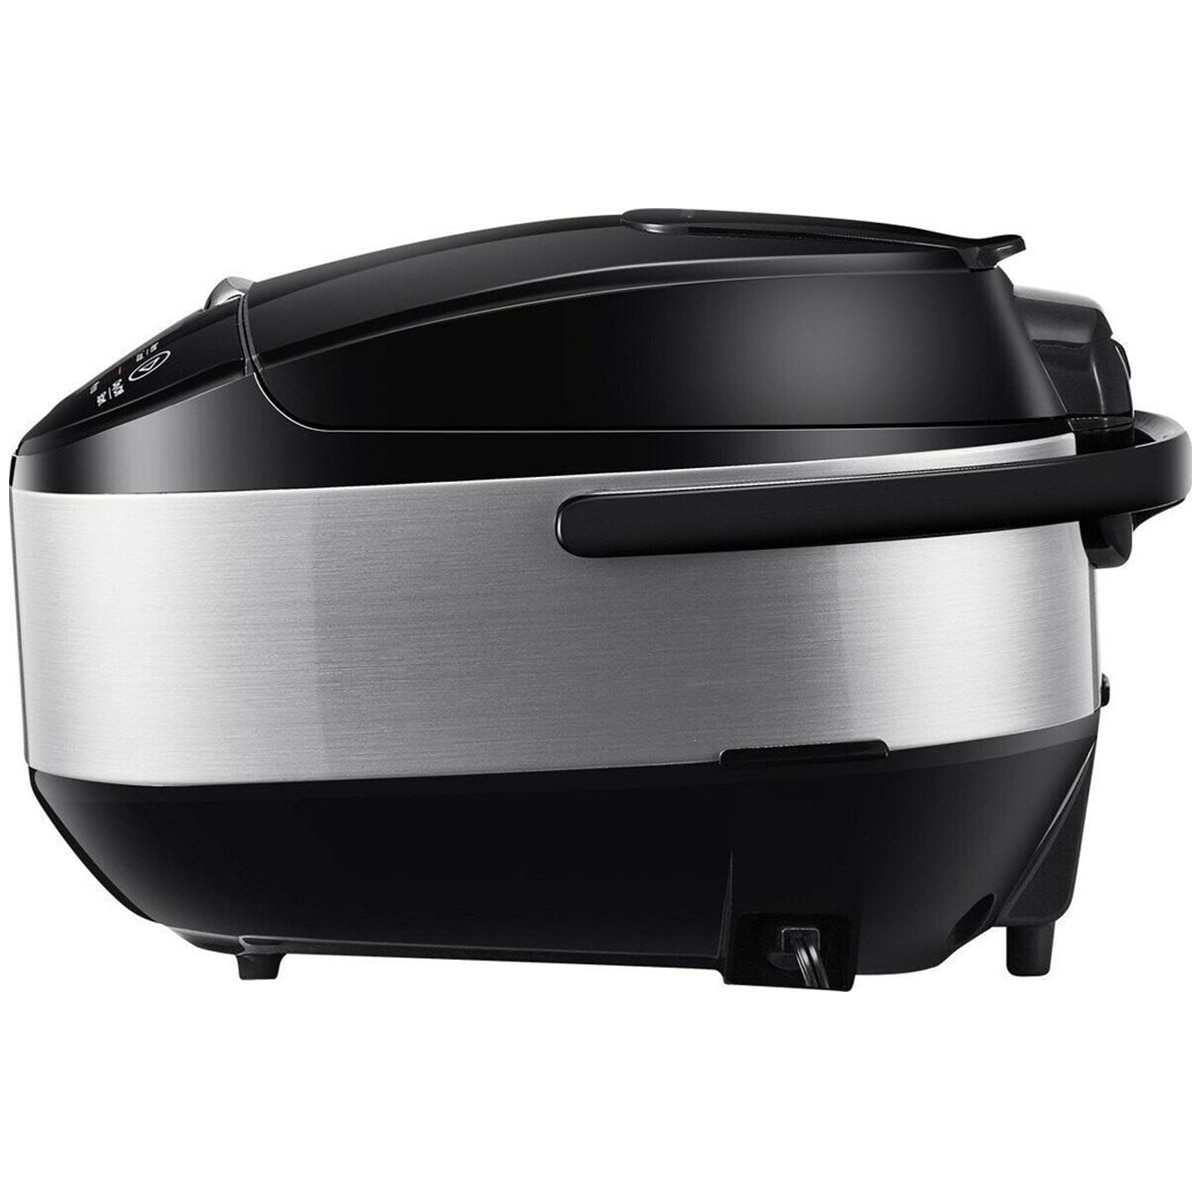 Midea Multifunction Cooker  Rice Cooker  Slow Cooker 5L